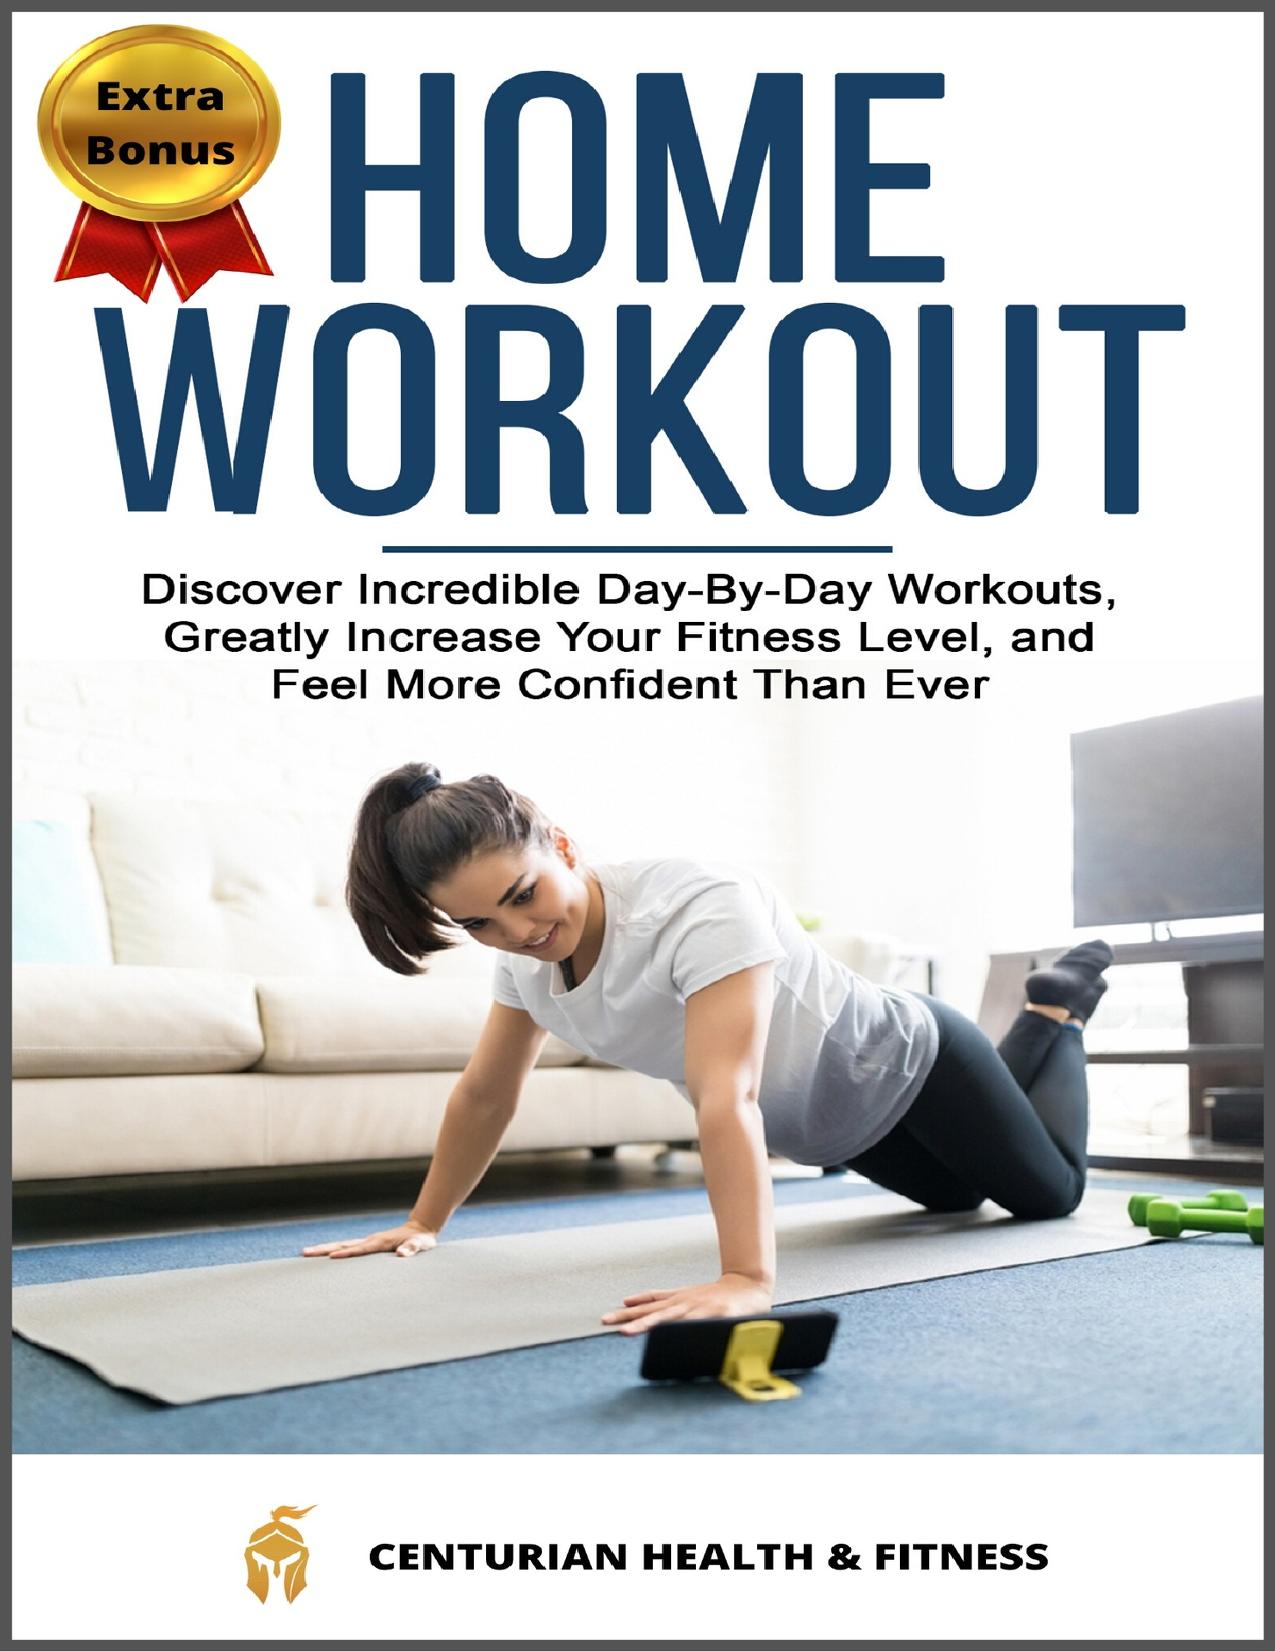 Home Workout: Discover Incredible Day-By-Day Workouts, Greatly Increase Your Fitness Level, and Feel More Confident Than Ever by Centurian Health Fitness